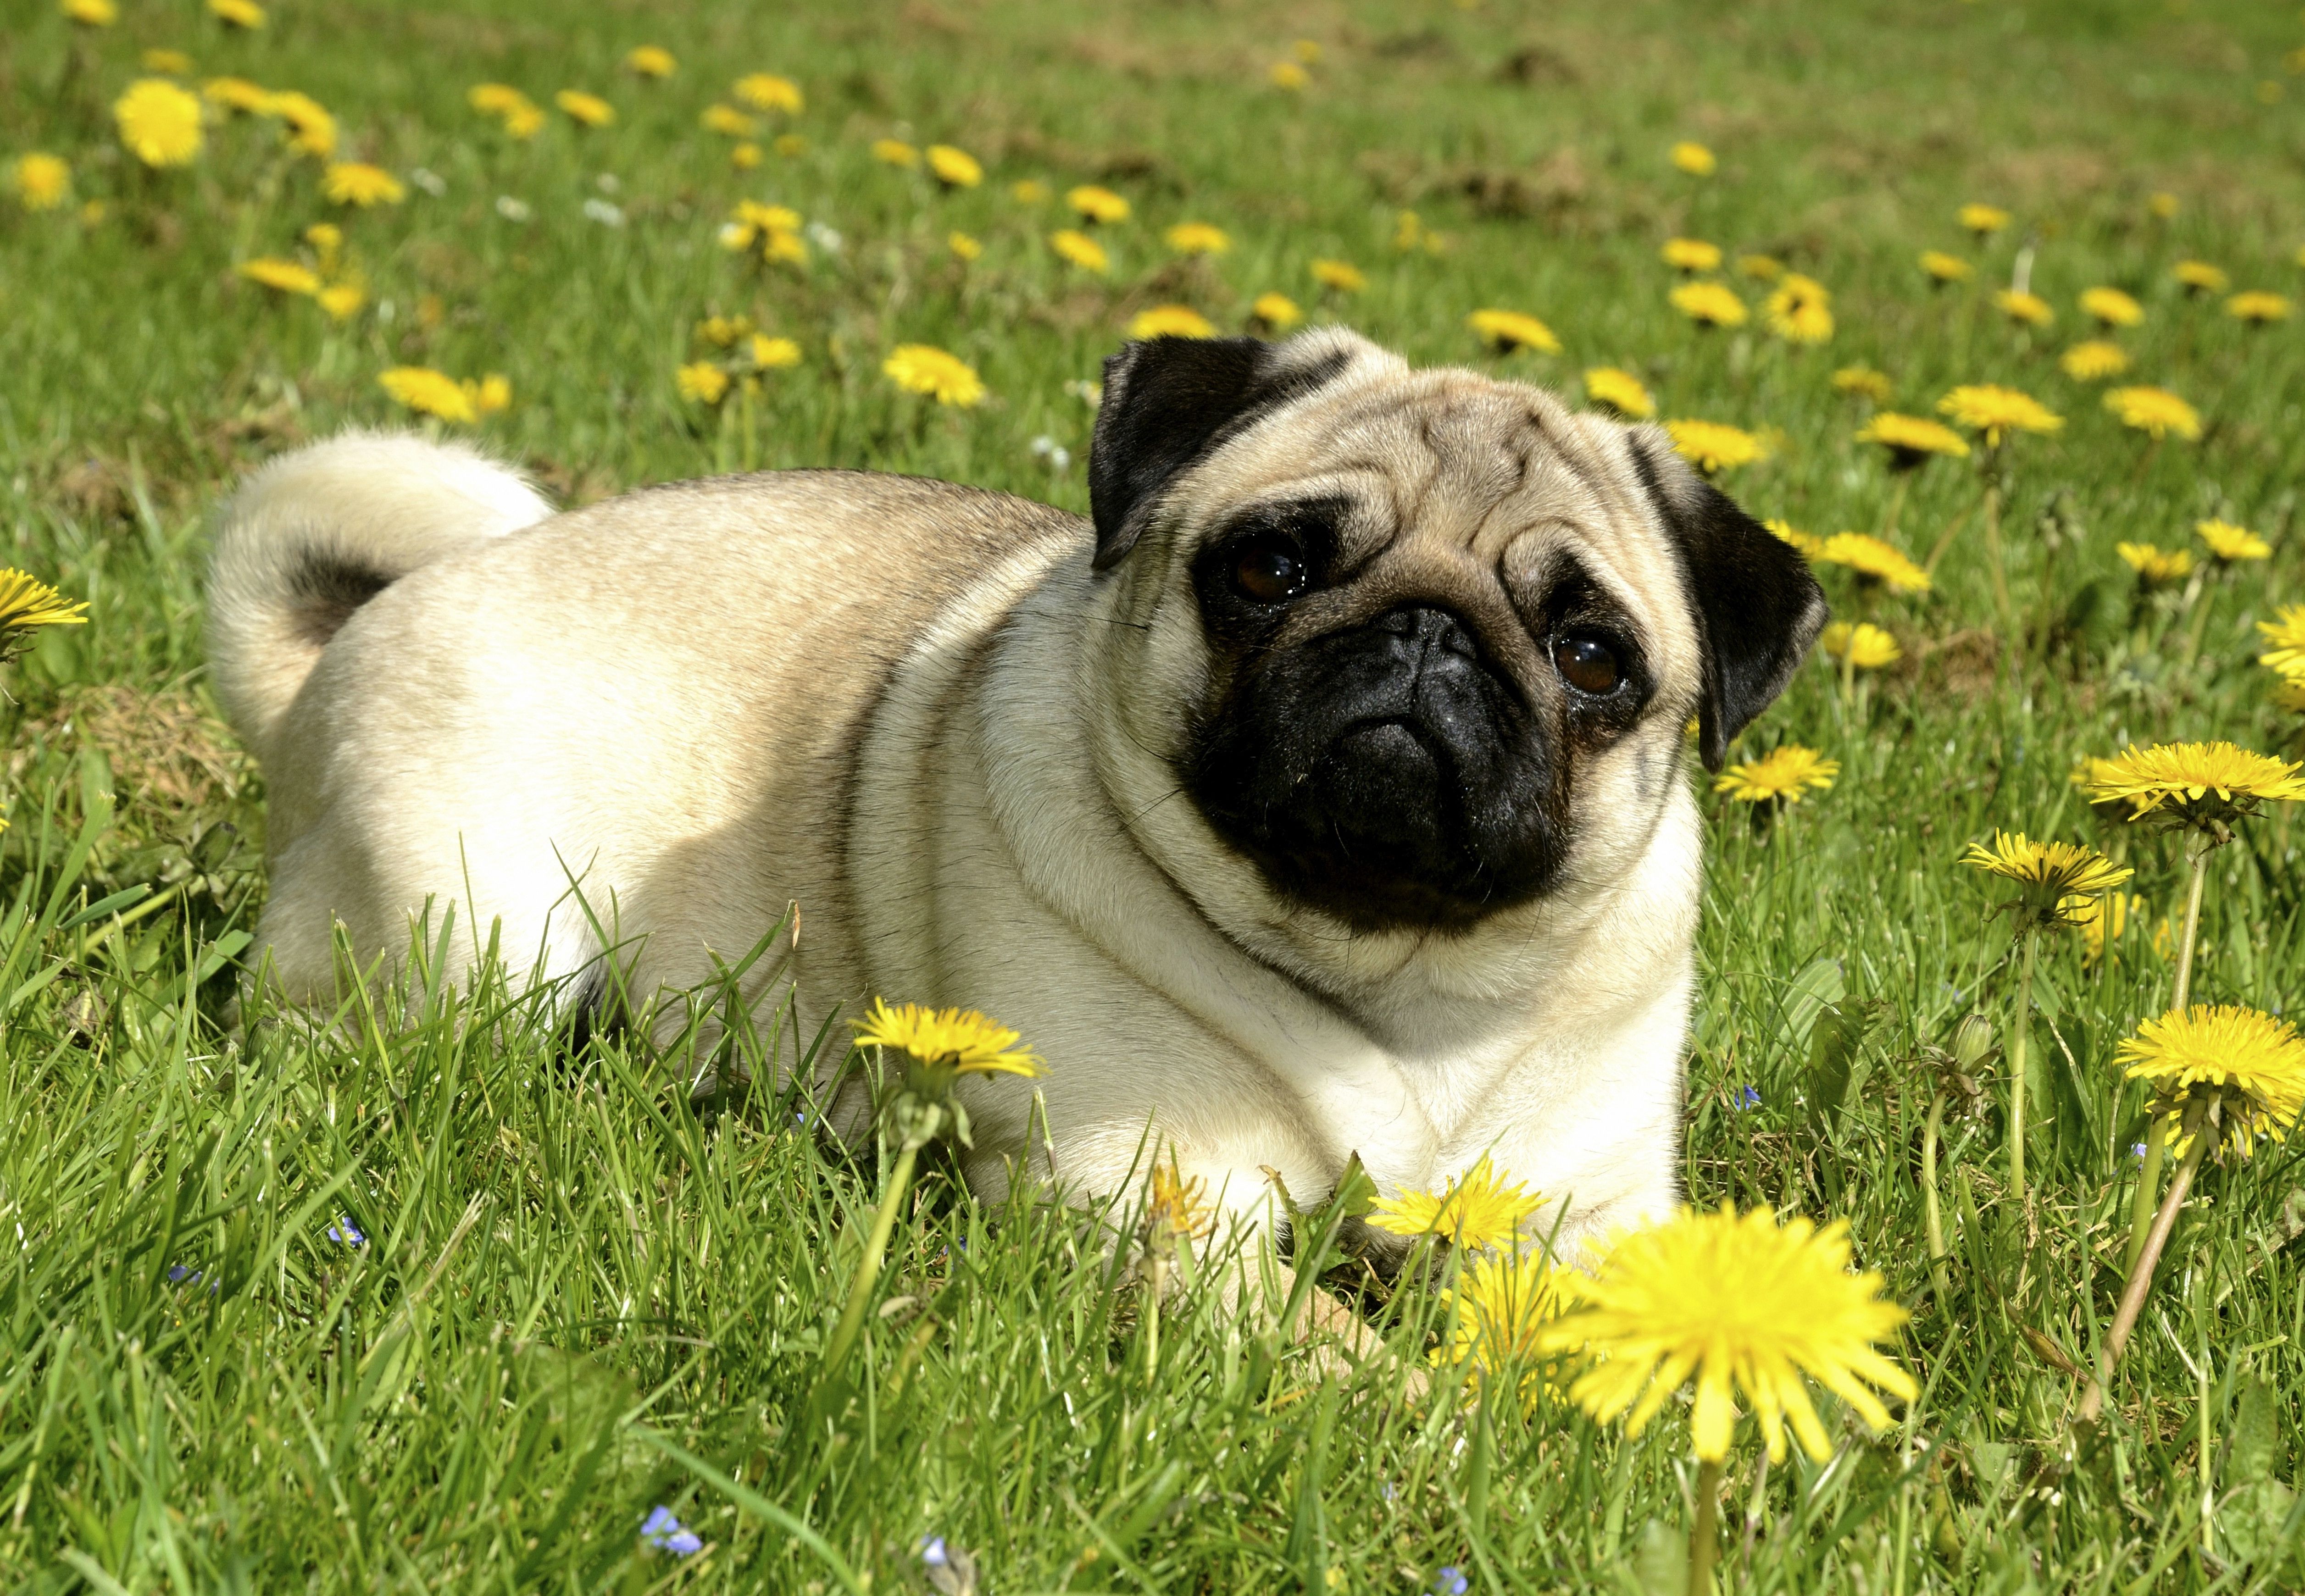 Pug lying in meadow with dandelions